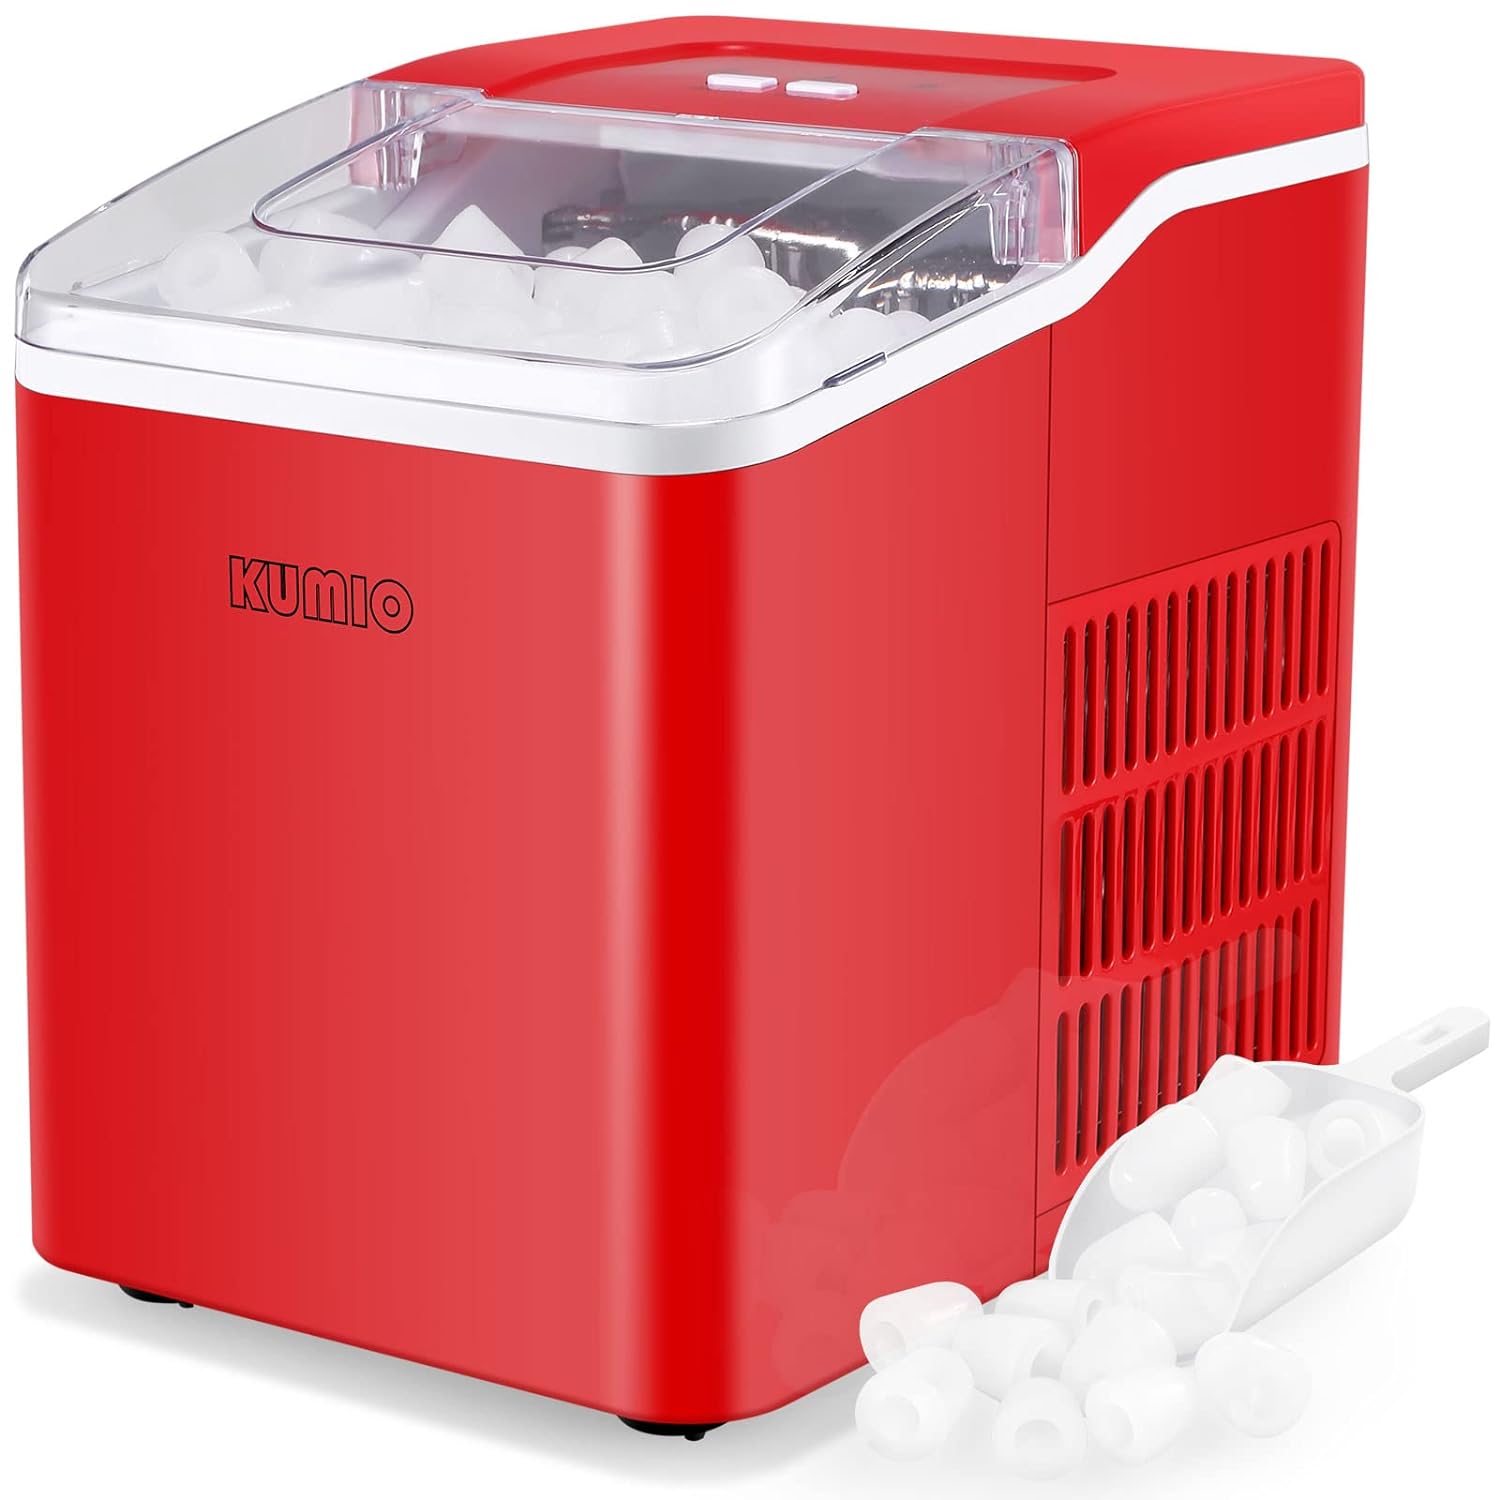 KUMIO Countertop Ice Maker, 9 Bullet Ice Fast Making in 6-8 Mins, 26.5 lbs in 24 hrs, Self-Cleaning Ice Makers Countertop, Quiet Ice Machine with Ice Scoop & Basket, Red